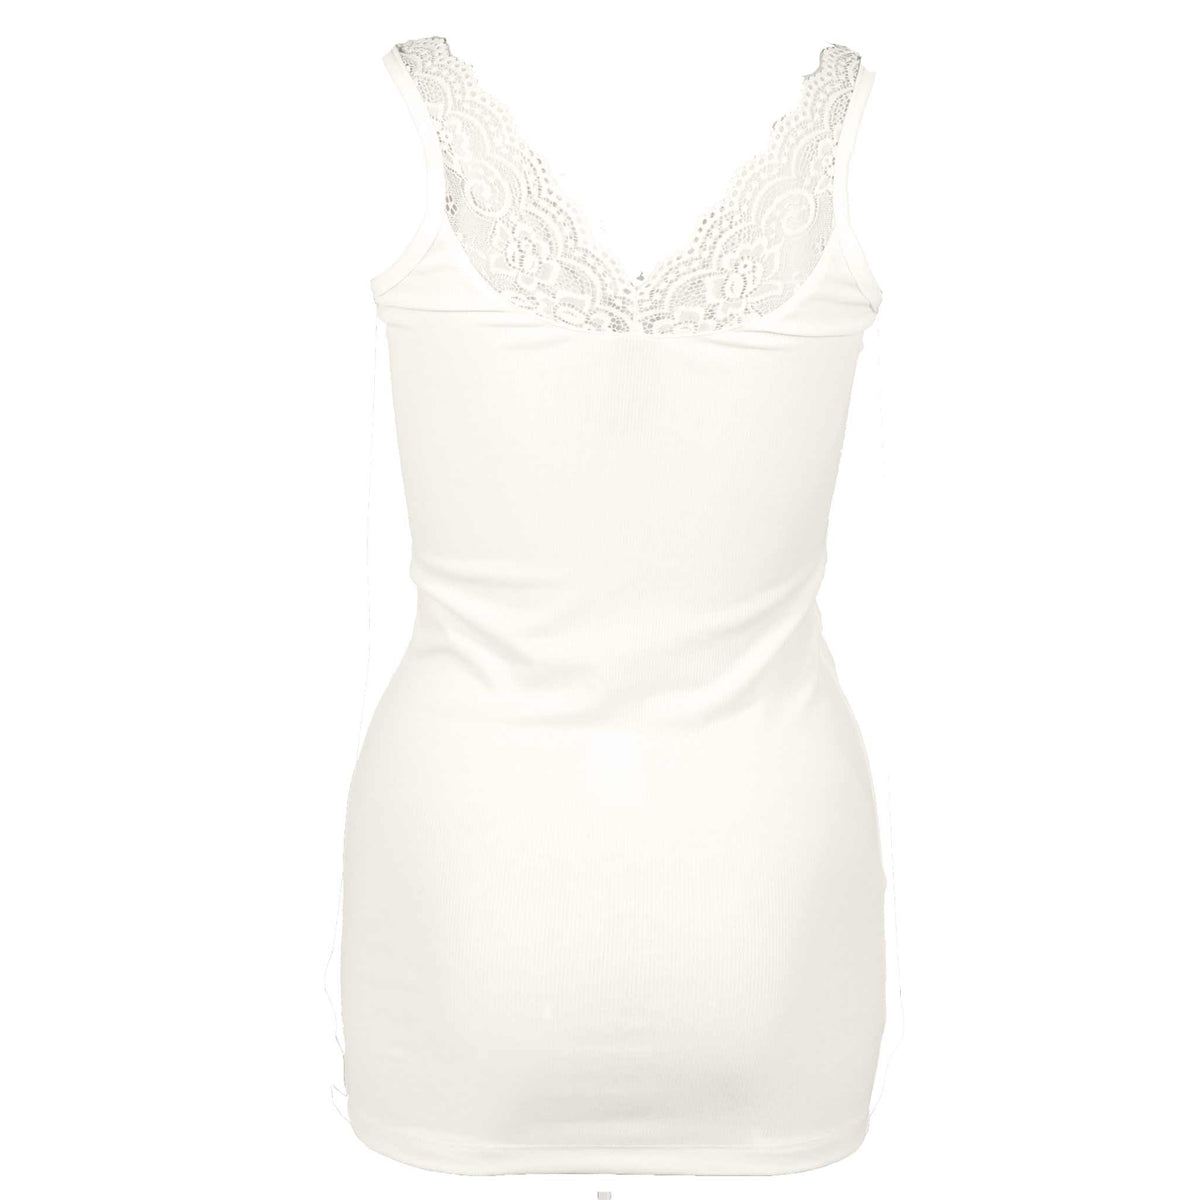 Only-M Camisole Lace